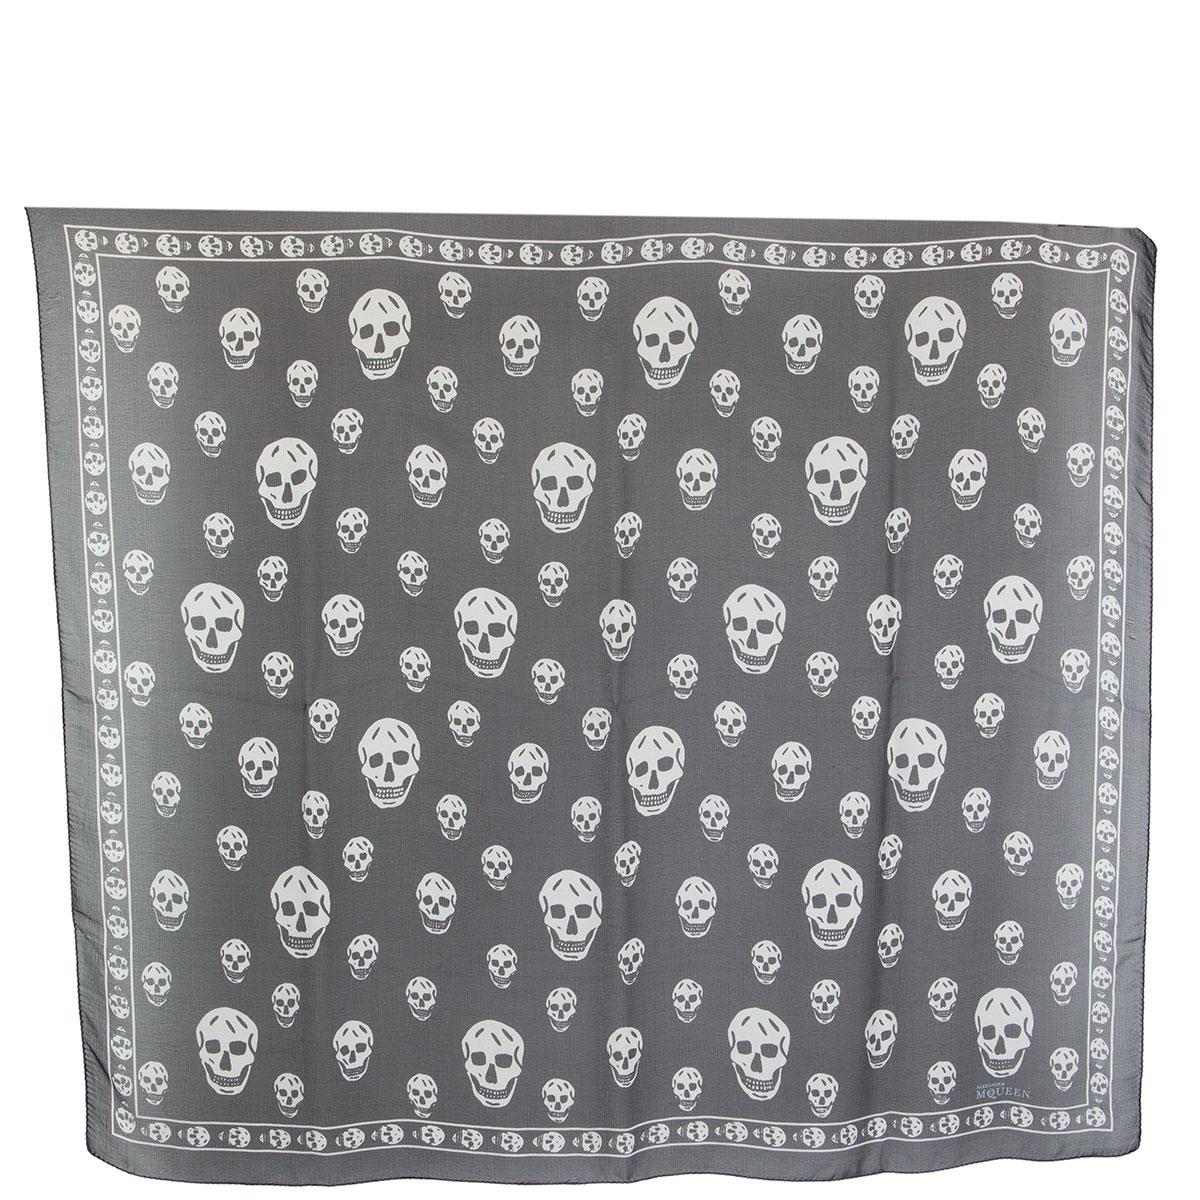 Alexander McQueen classic skull scarf in black and white silk chiffon (100%). Has been worn and is in excellent condition. 

Width 120cm (46.8in)
Length 100cm (39in)
